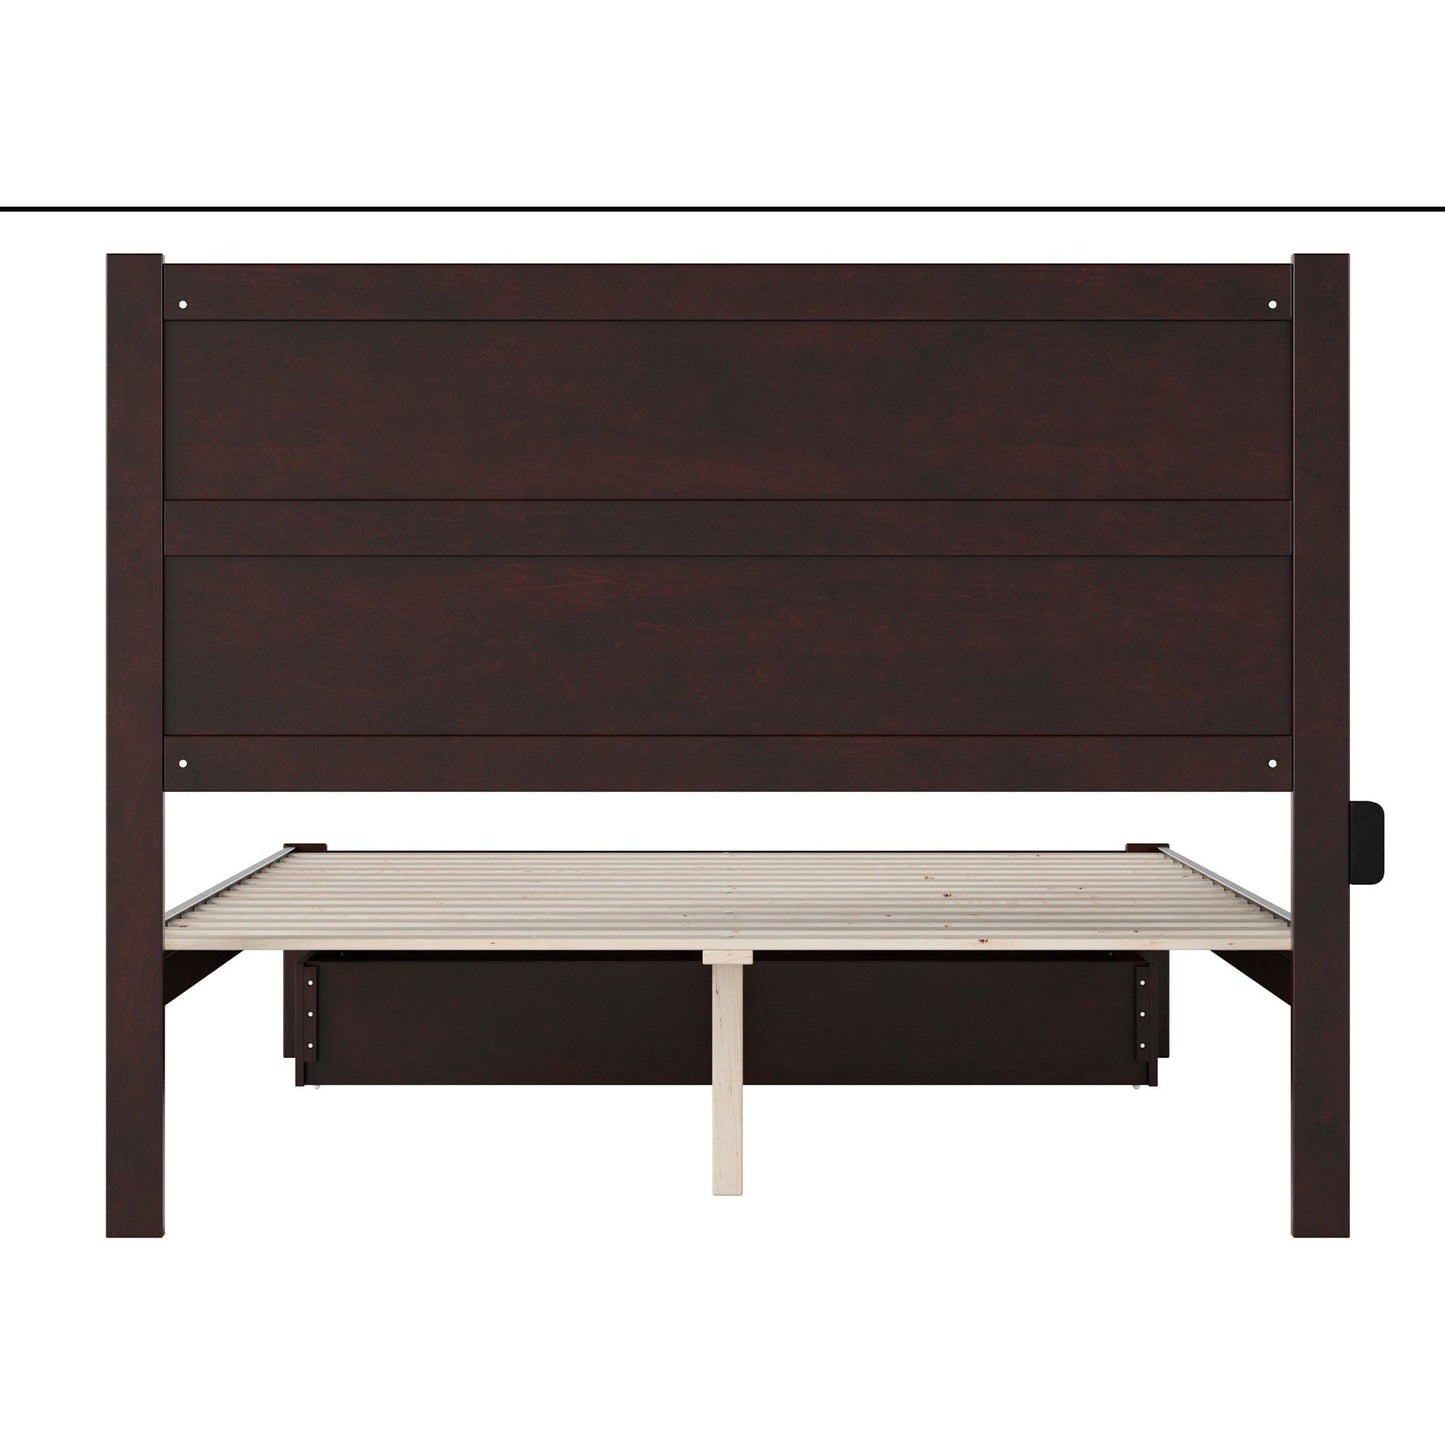 AFI Furnishings NoHo Queen Bed with Foot Drawer in Espresso